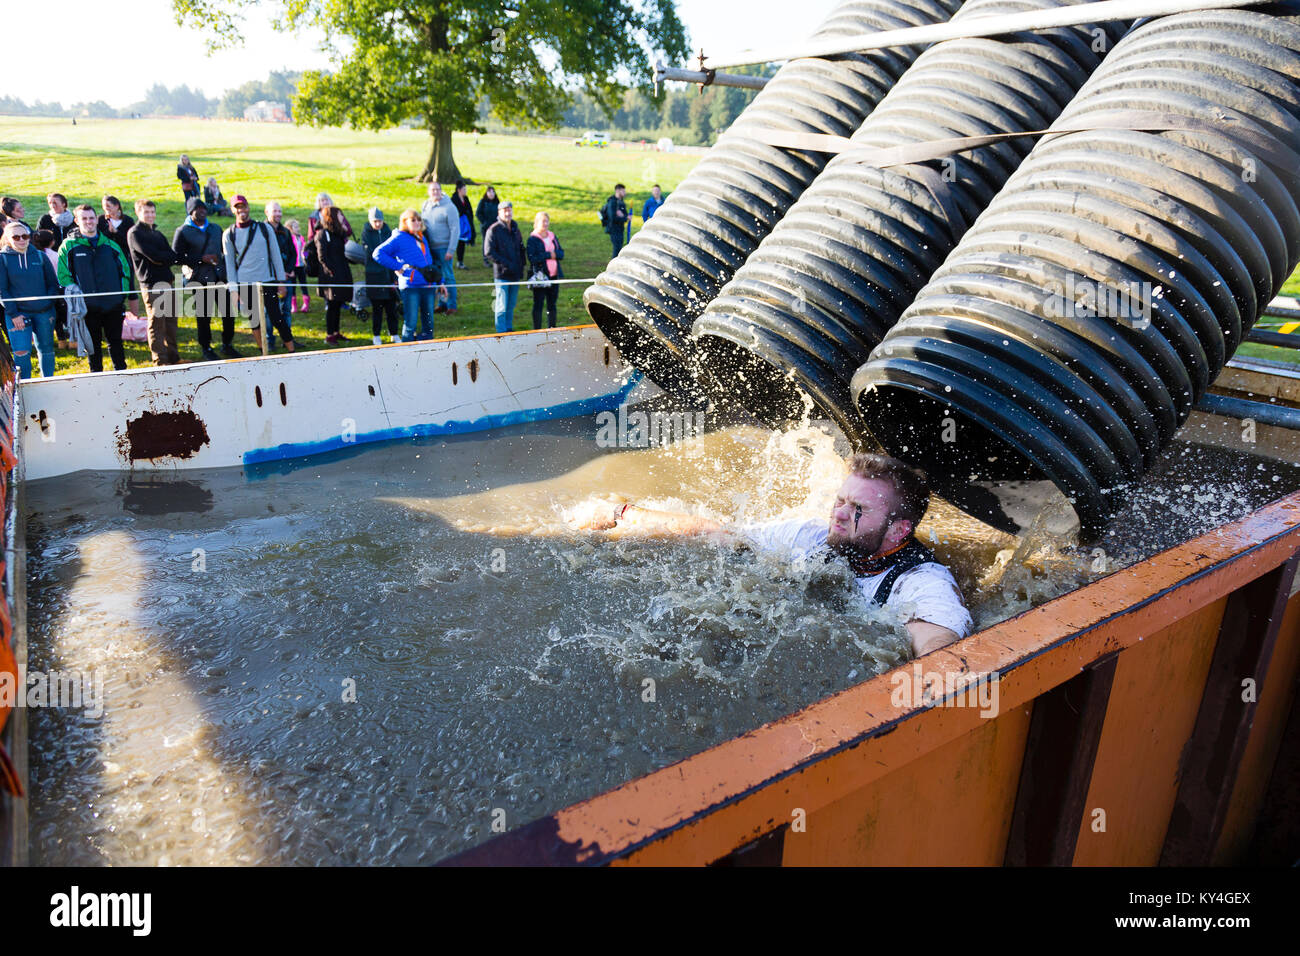 Sussex, UK. A group of spectators watch as a man slides down a black plastic tube into a large pool of freezing cold water during a Tough Mudder event Stock Photo